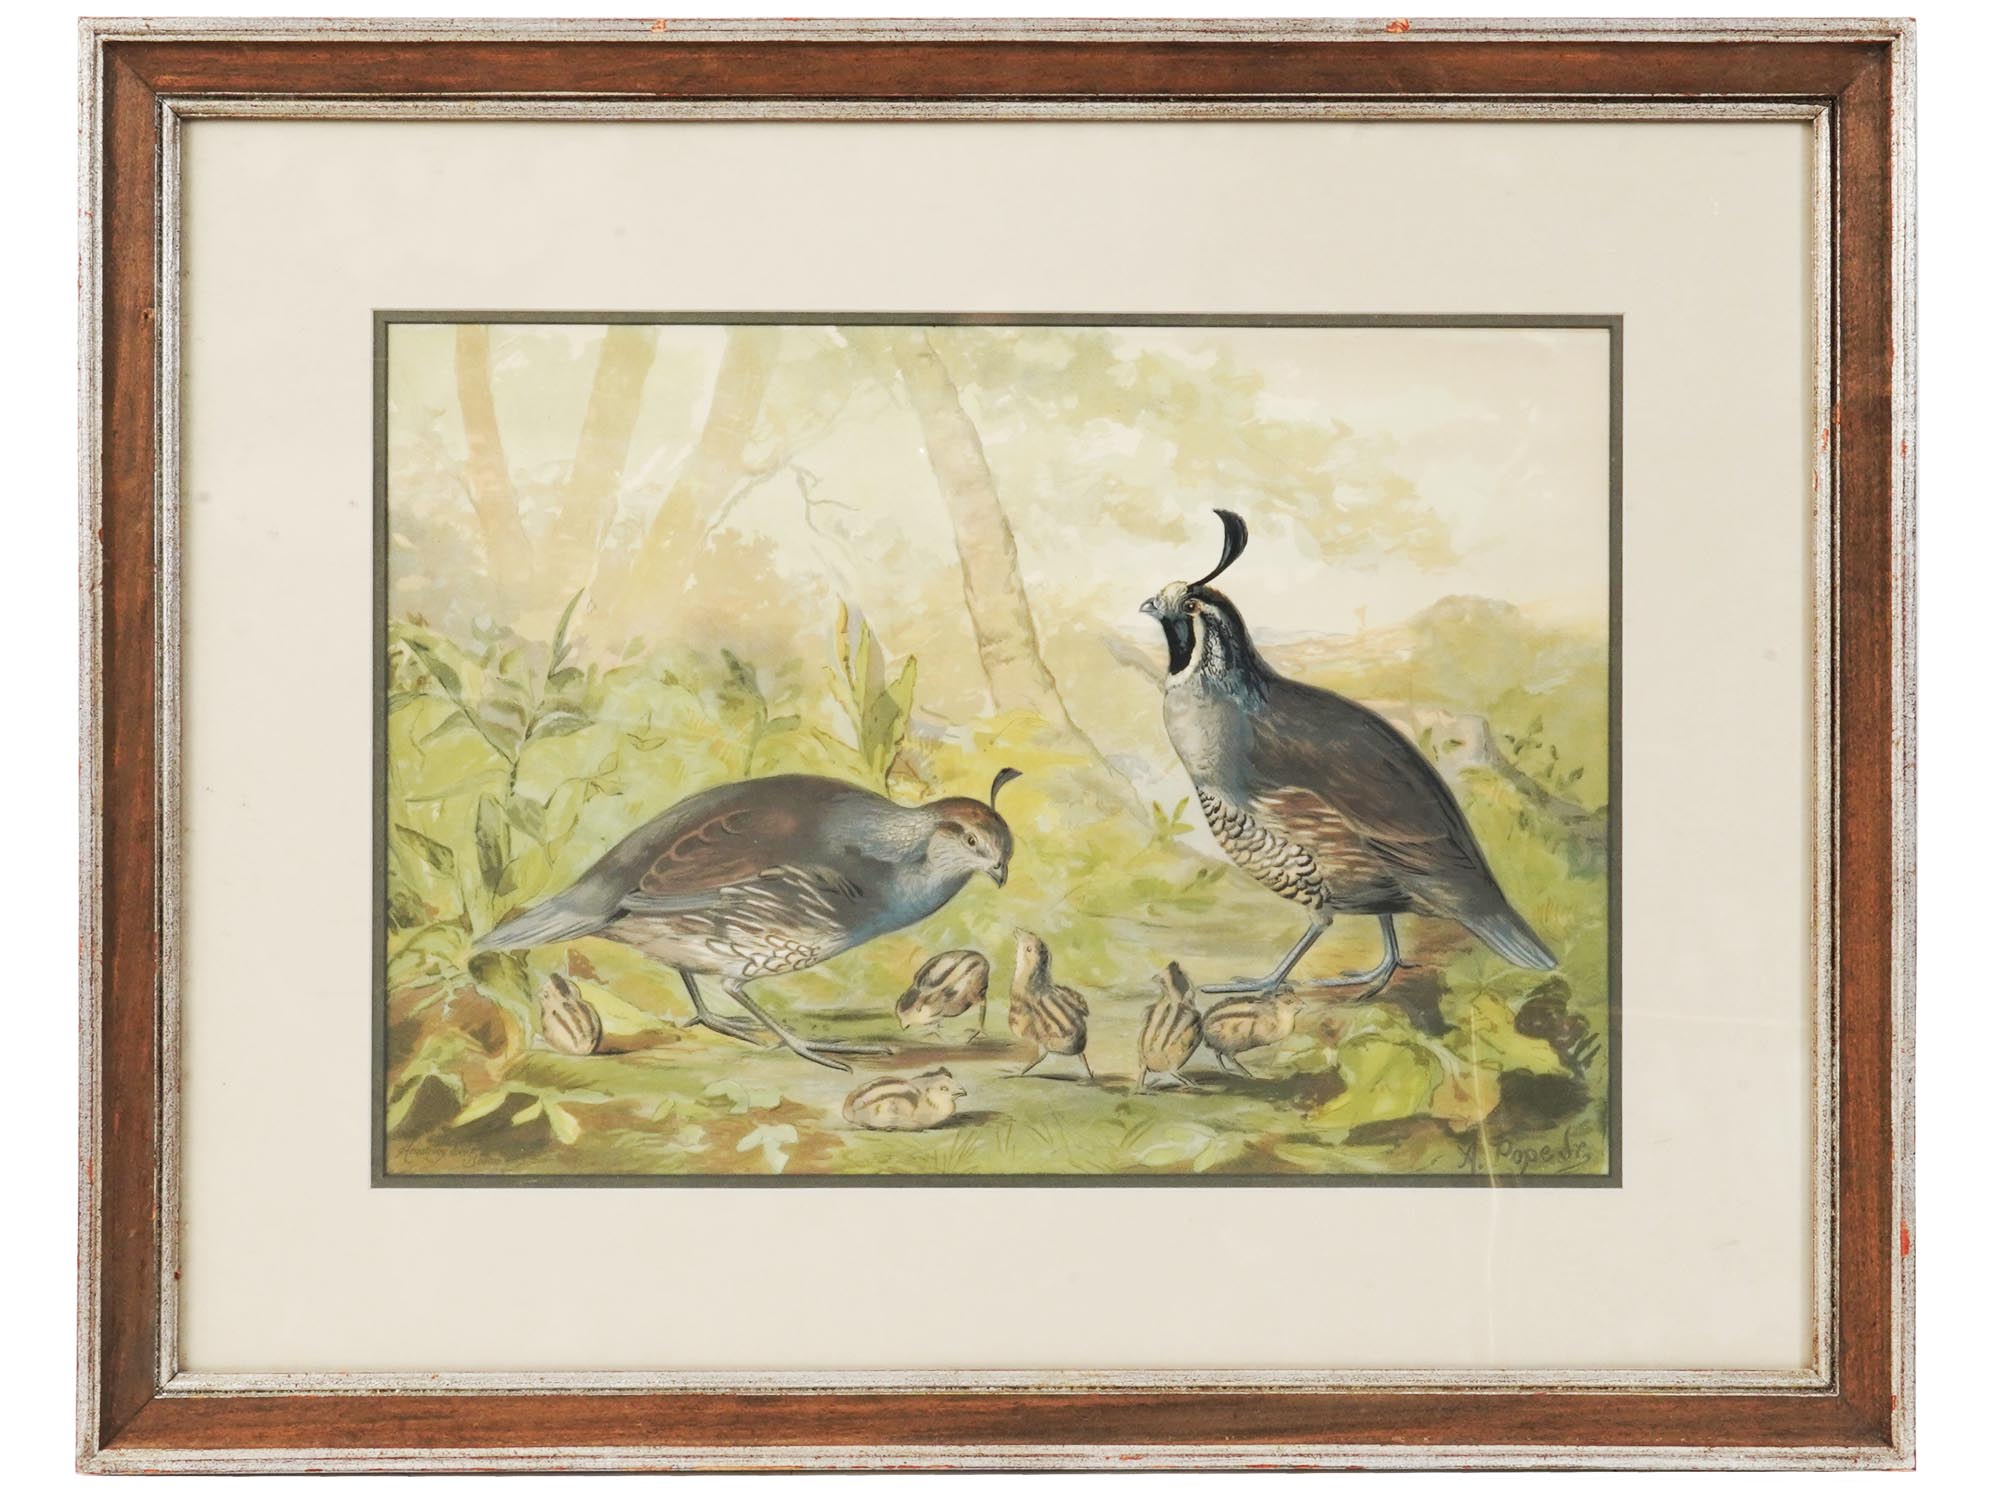 FRAMED LITHOGRAPH OF BIRDS BY ALEXANDER POPE JR PIC-0